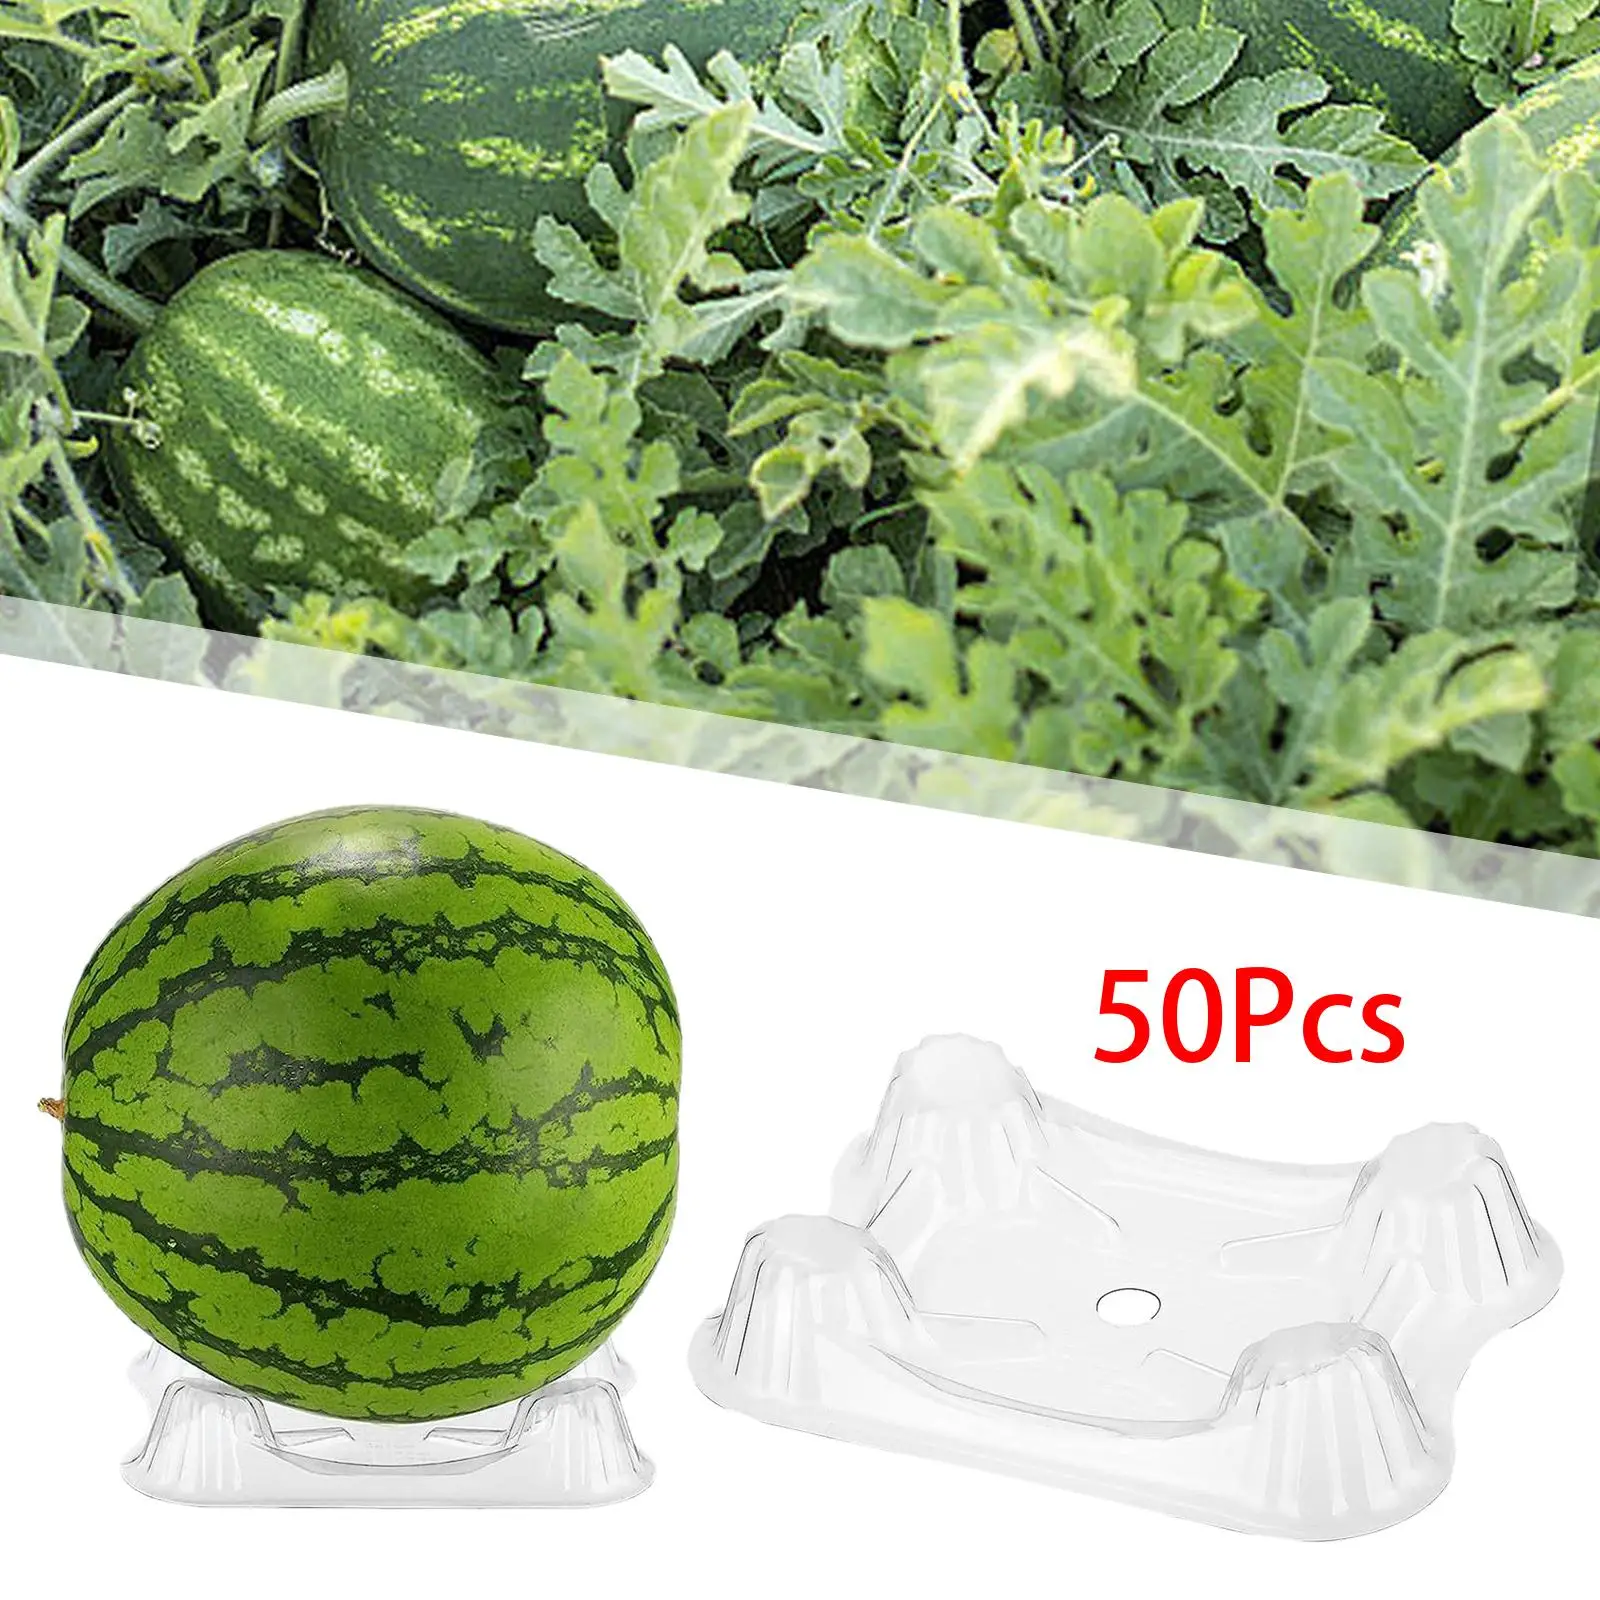 50 Pieces Melon Support Cradle Garden Cages Tray Garden Plant Support for Pumpkin Strawberry Courgette Cantaloupe Watermelon